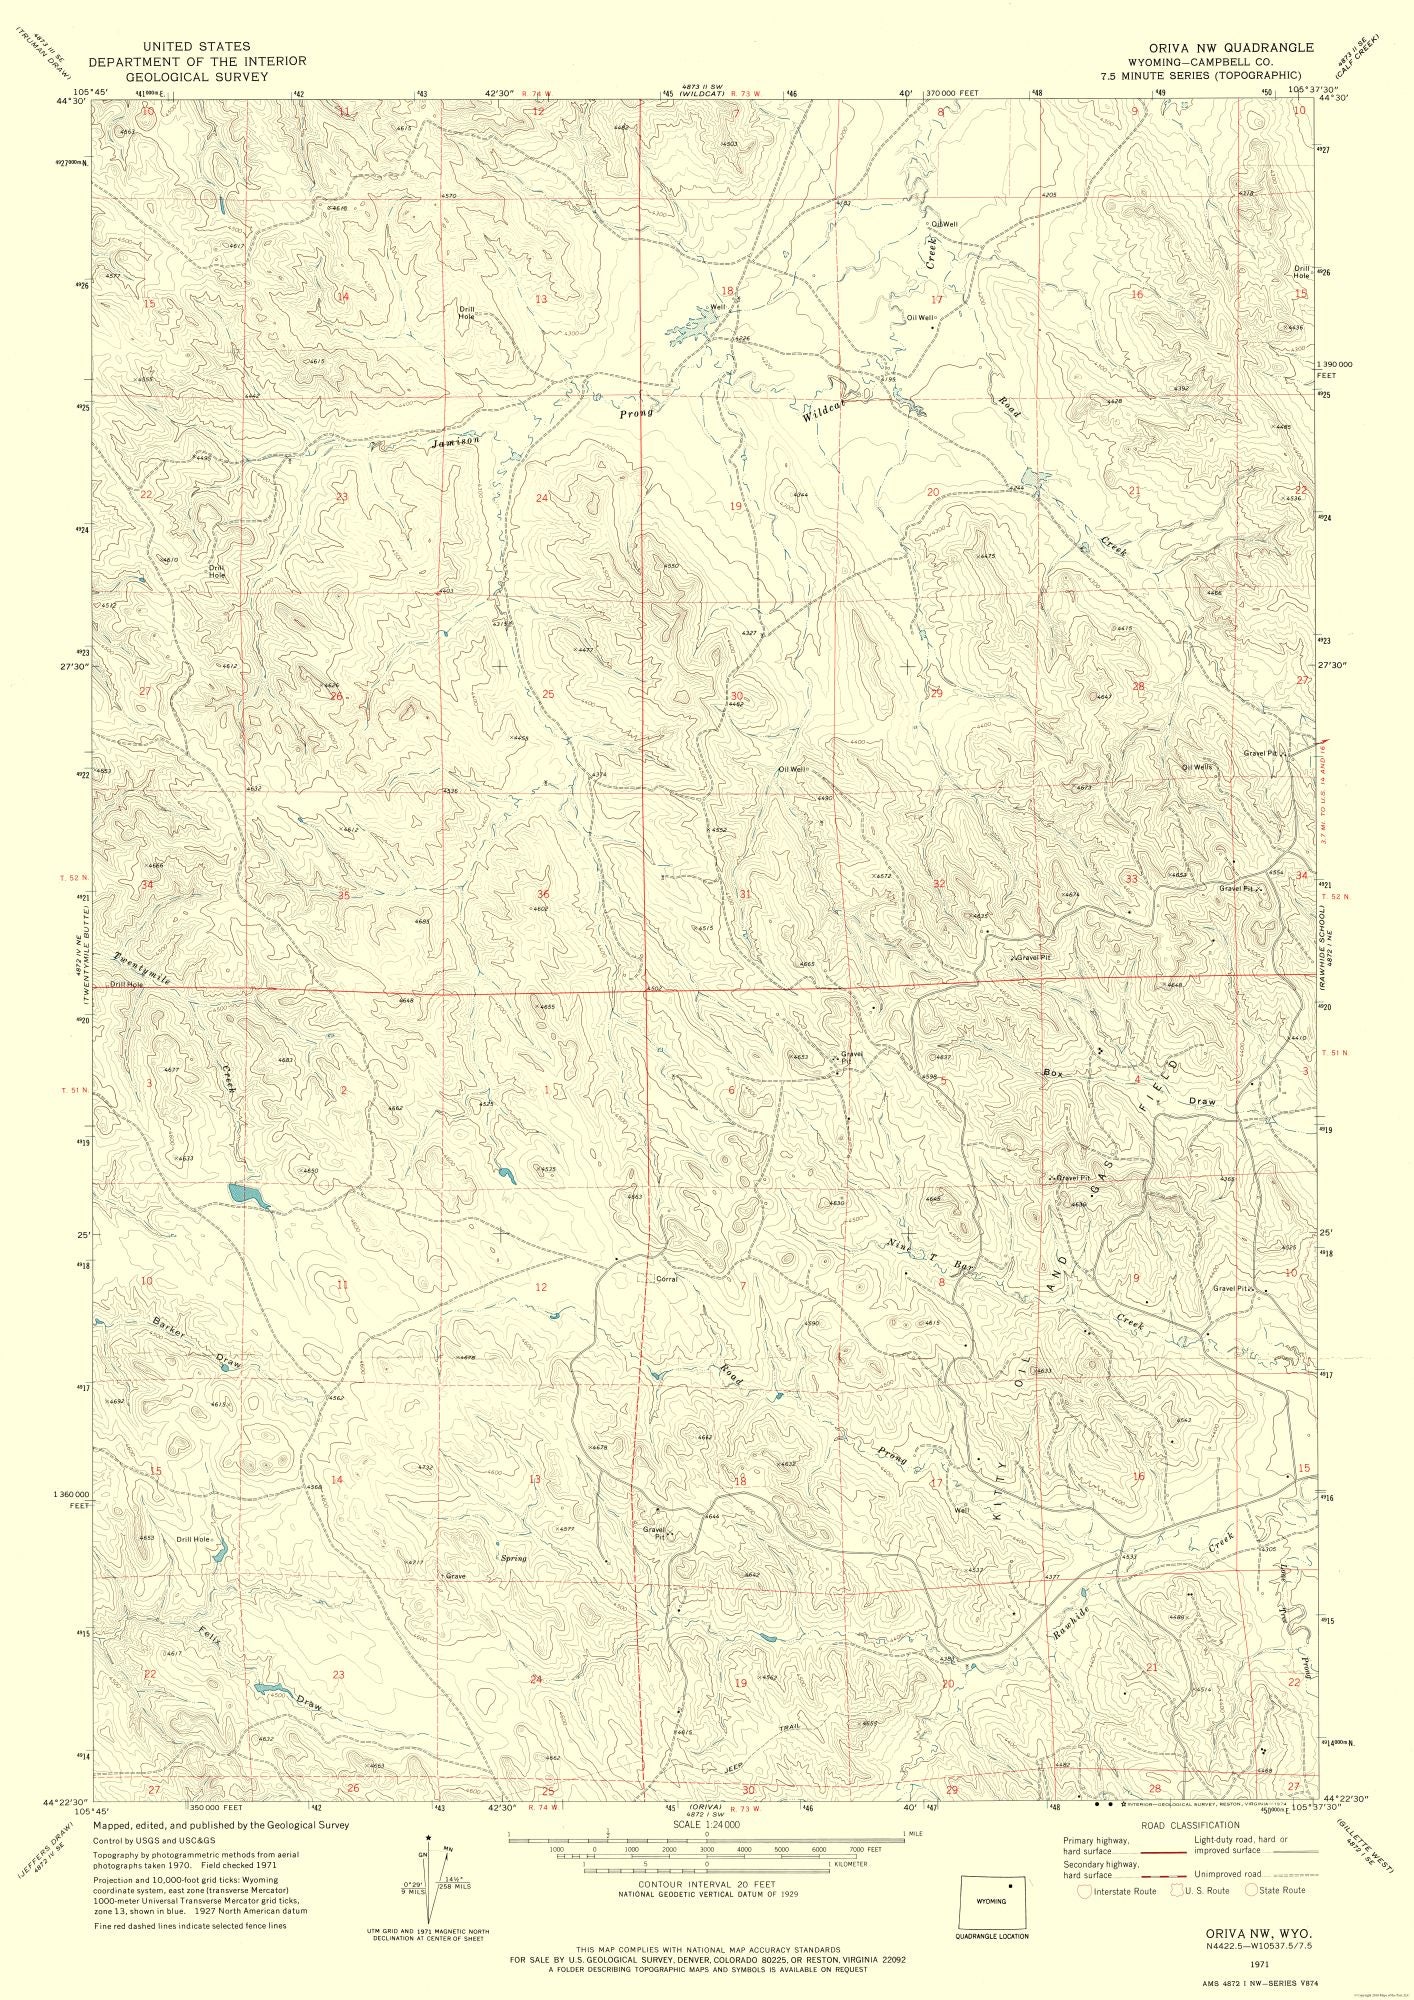 Topographical Map - North West Oriva Wyoming Quad - USGS 1971 - 23 x 32.52 - Vintage Wall Art